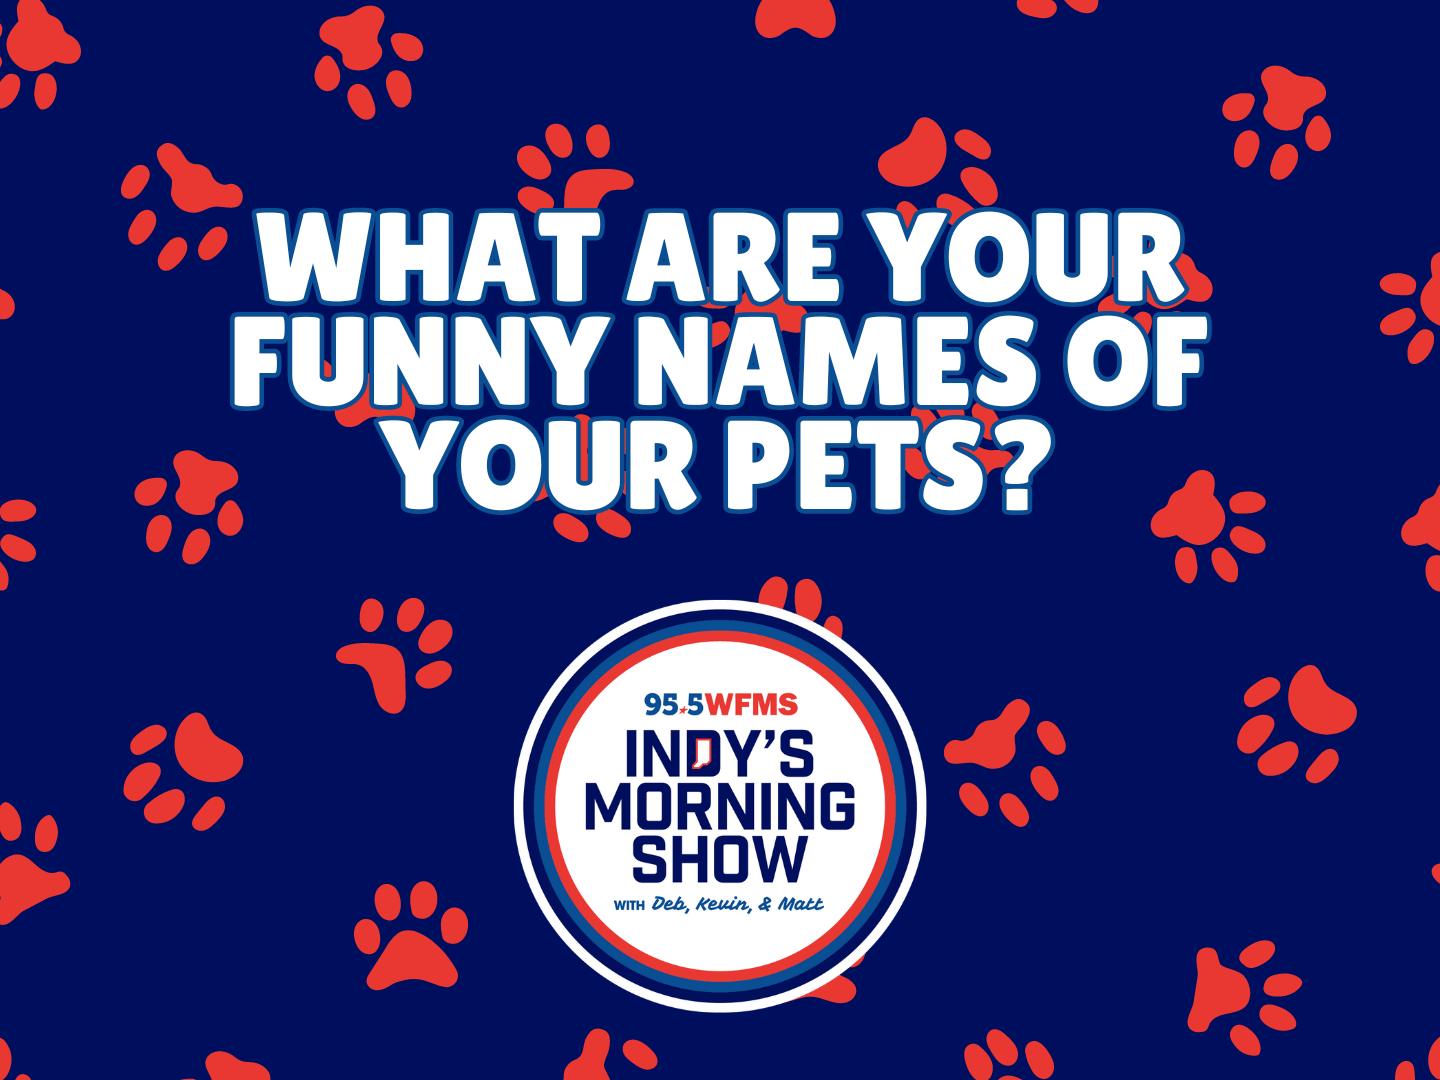 Does Your Pet Have A Funny Name?